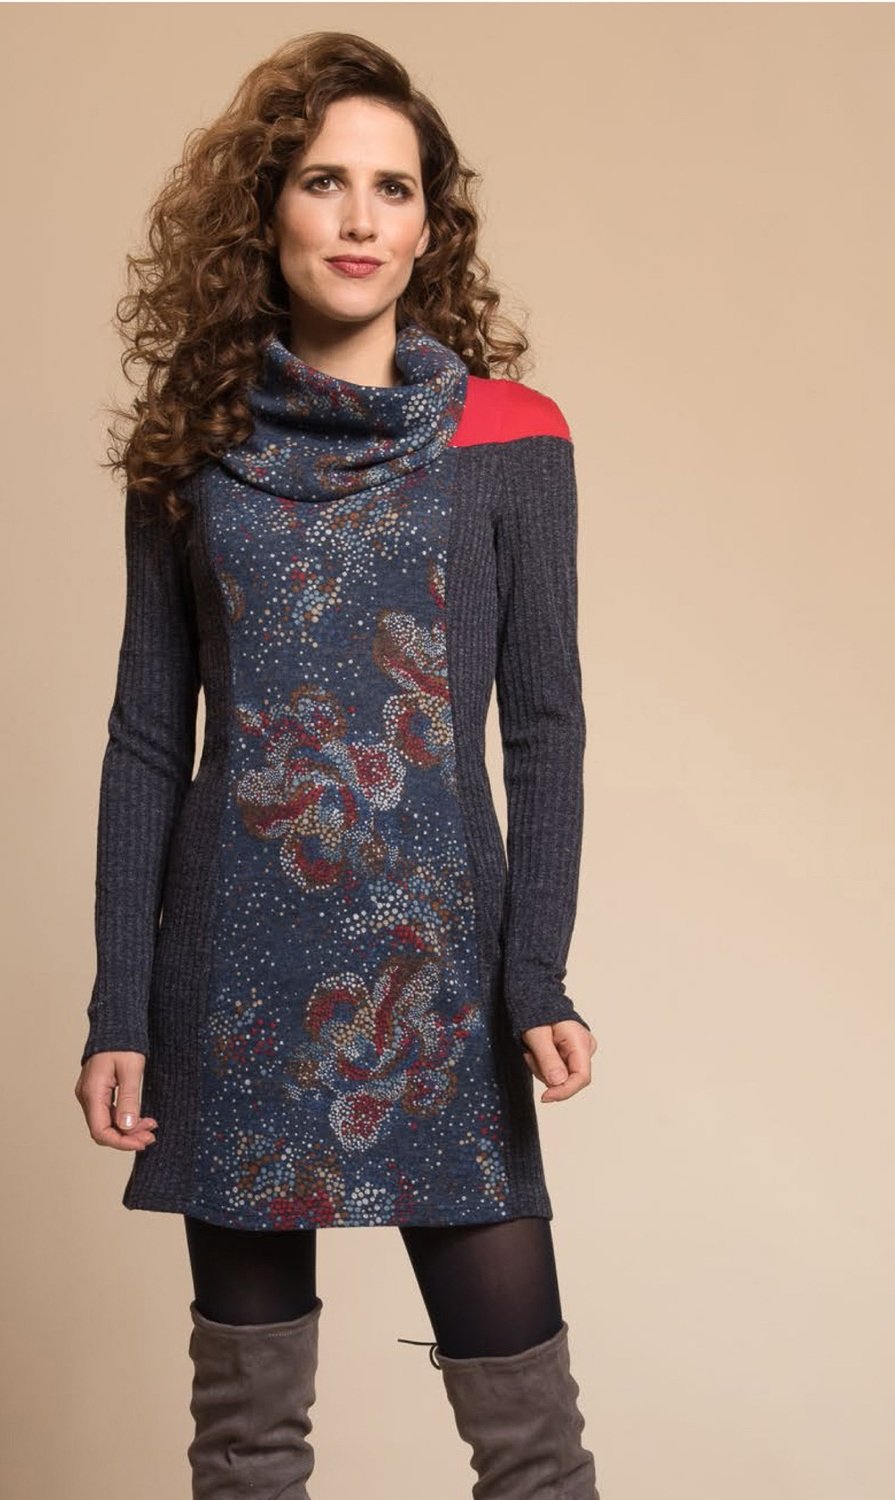 Myco Anna: Cosmic Eco-Wear Asymmetrical Patchwork Sweater Dress SOLD OUT